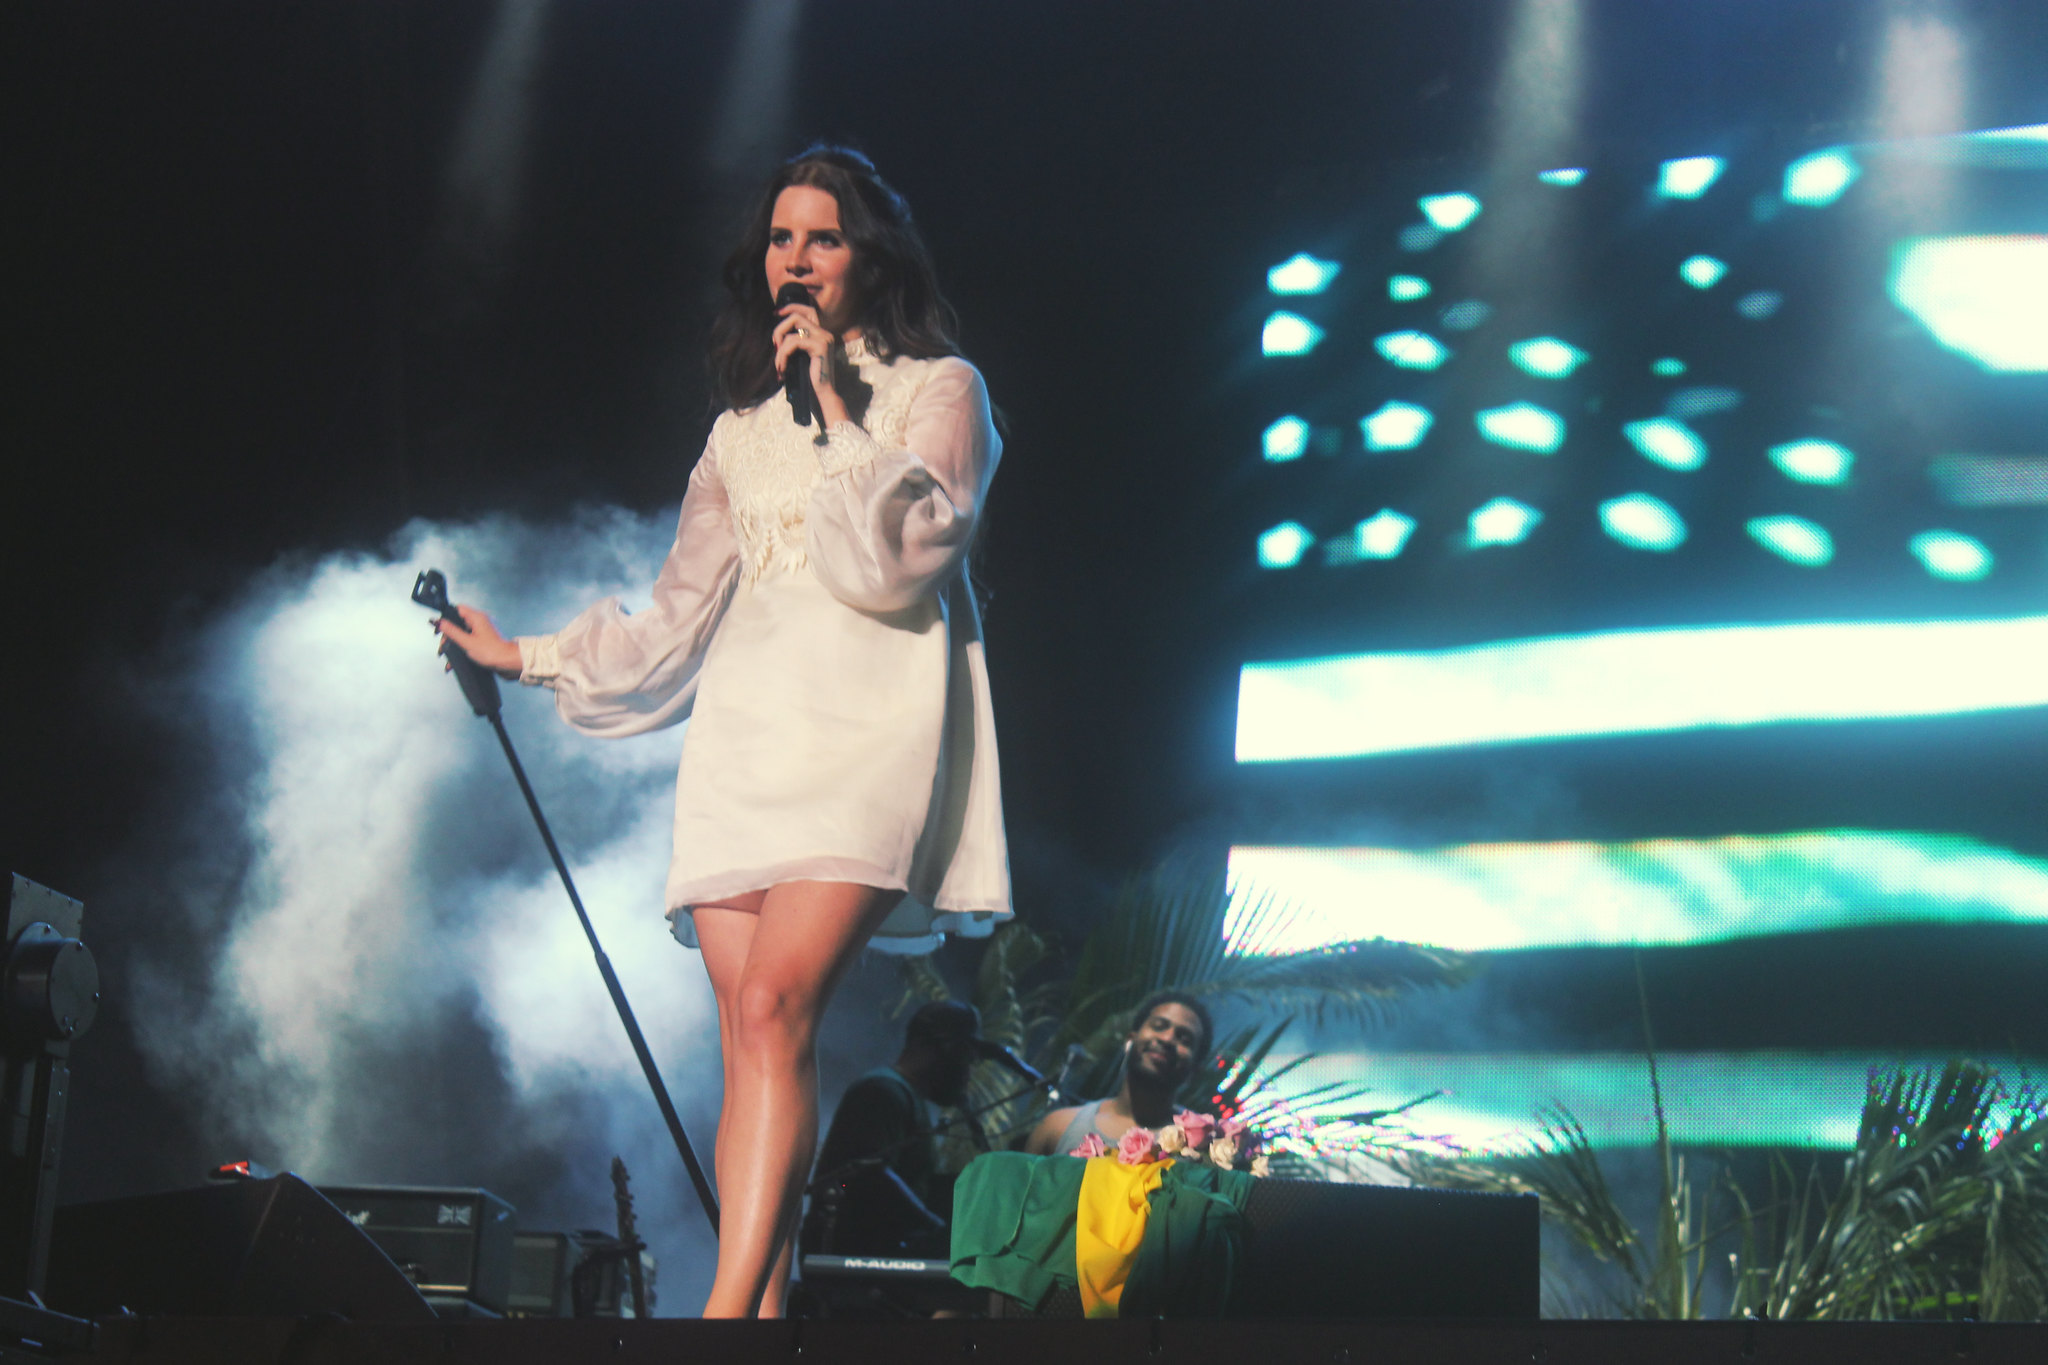 Lana Del Rey singing at a concert with the USA flag behind her.